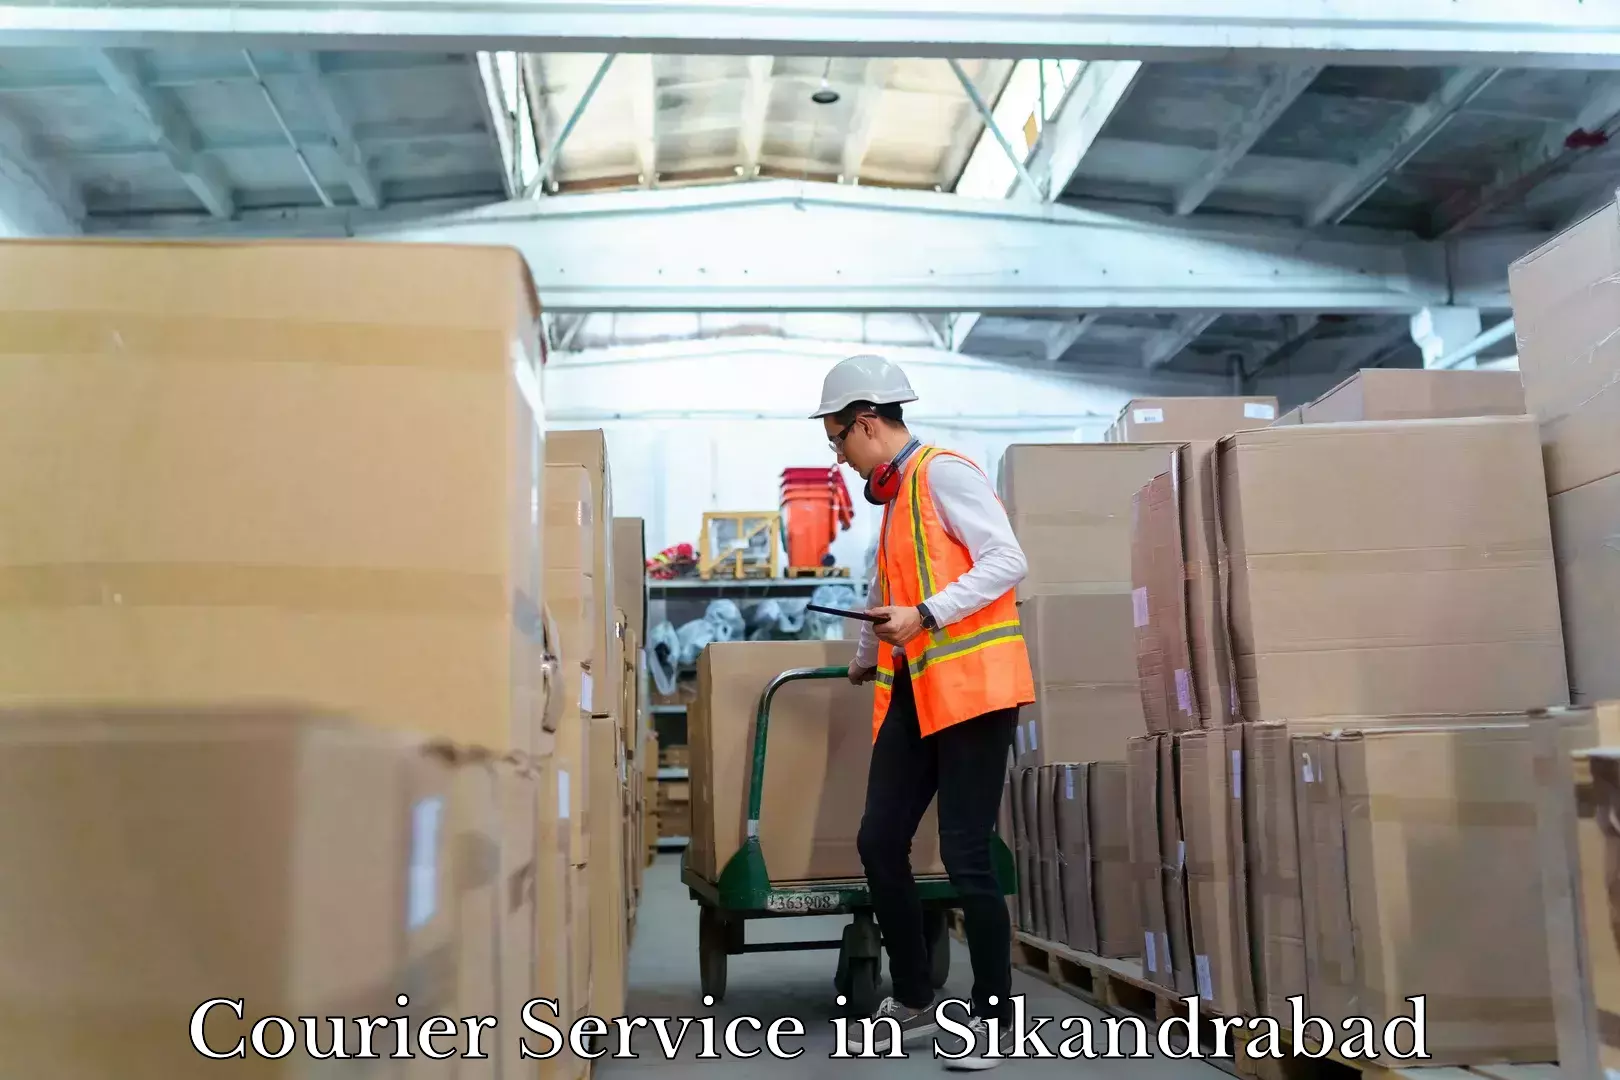 Round-the-clock parcel delivery in Sikandrabad